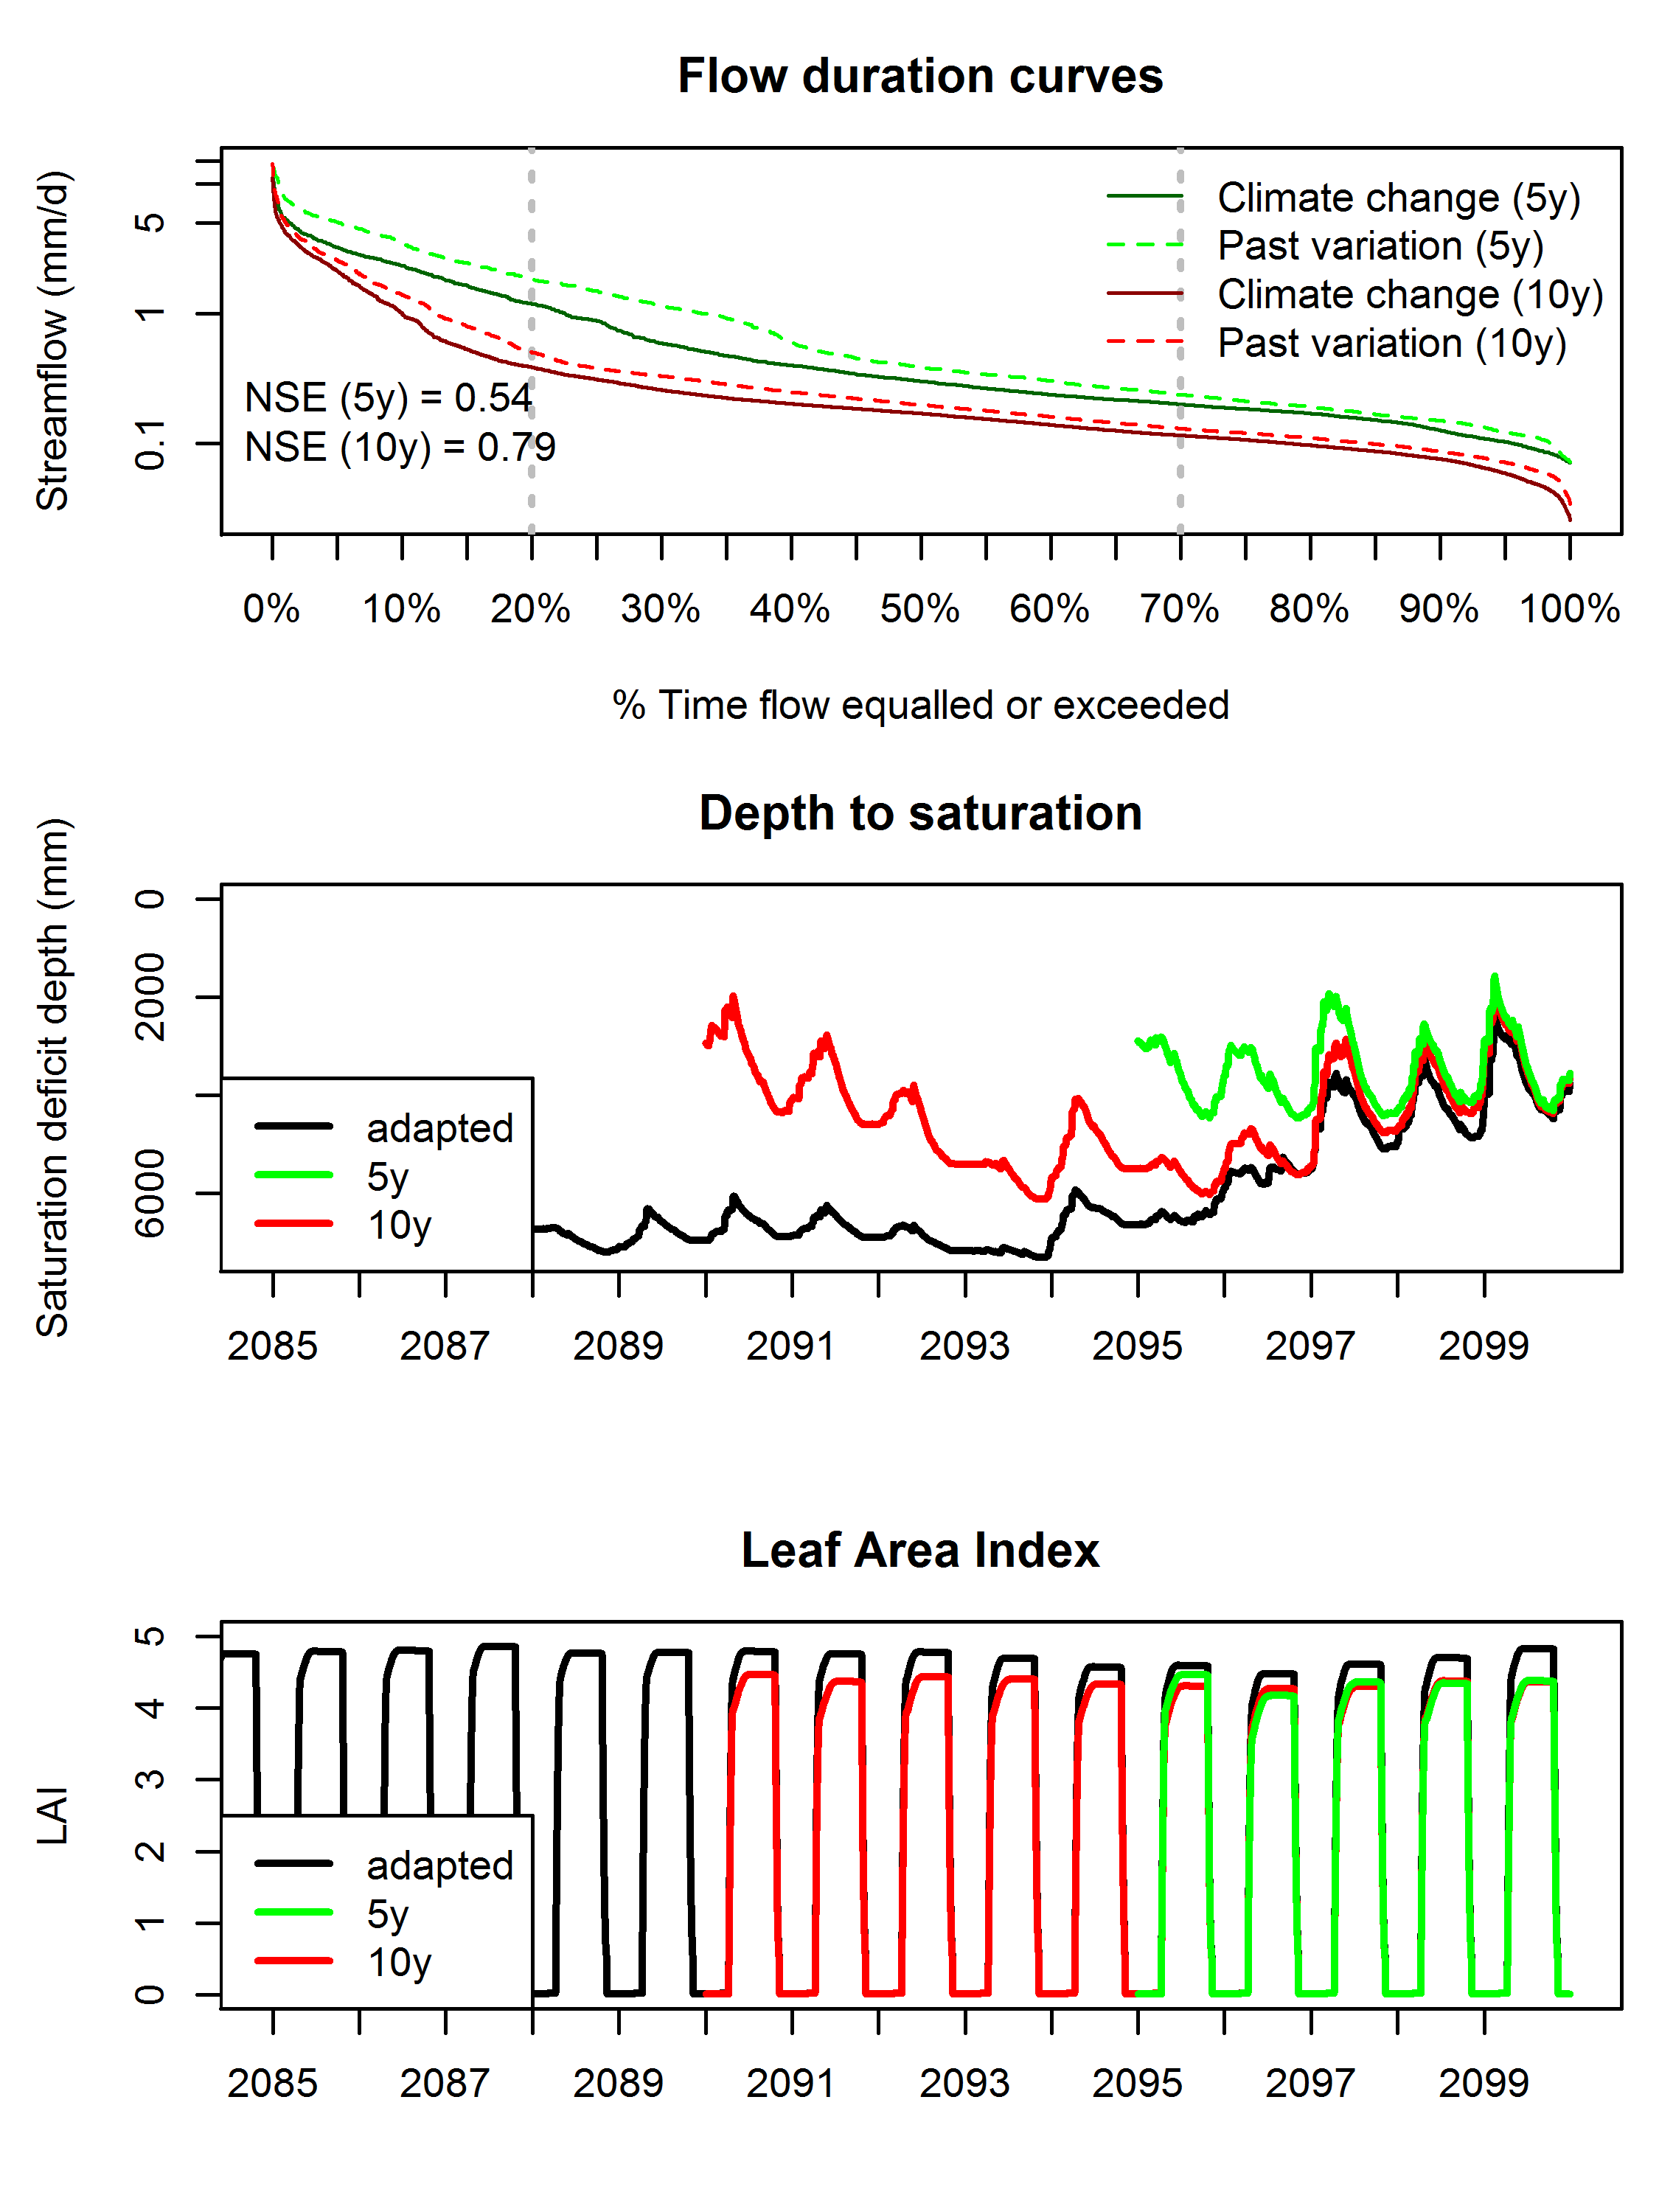 Figure 1. Results for experiment with severe climate change and drier average conditions.